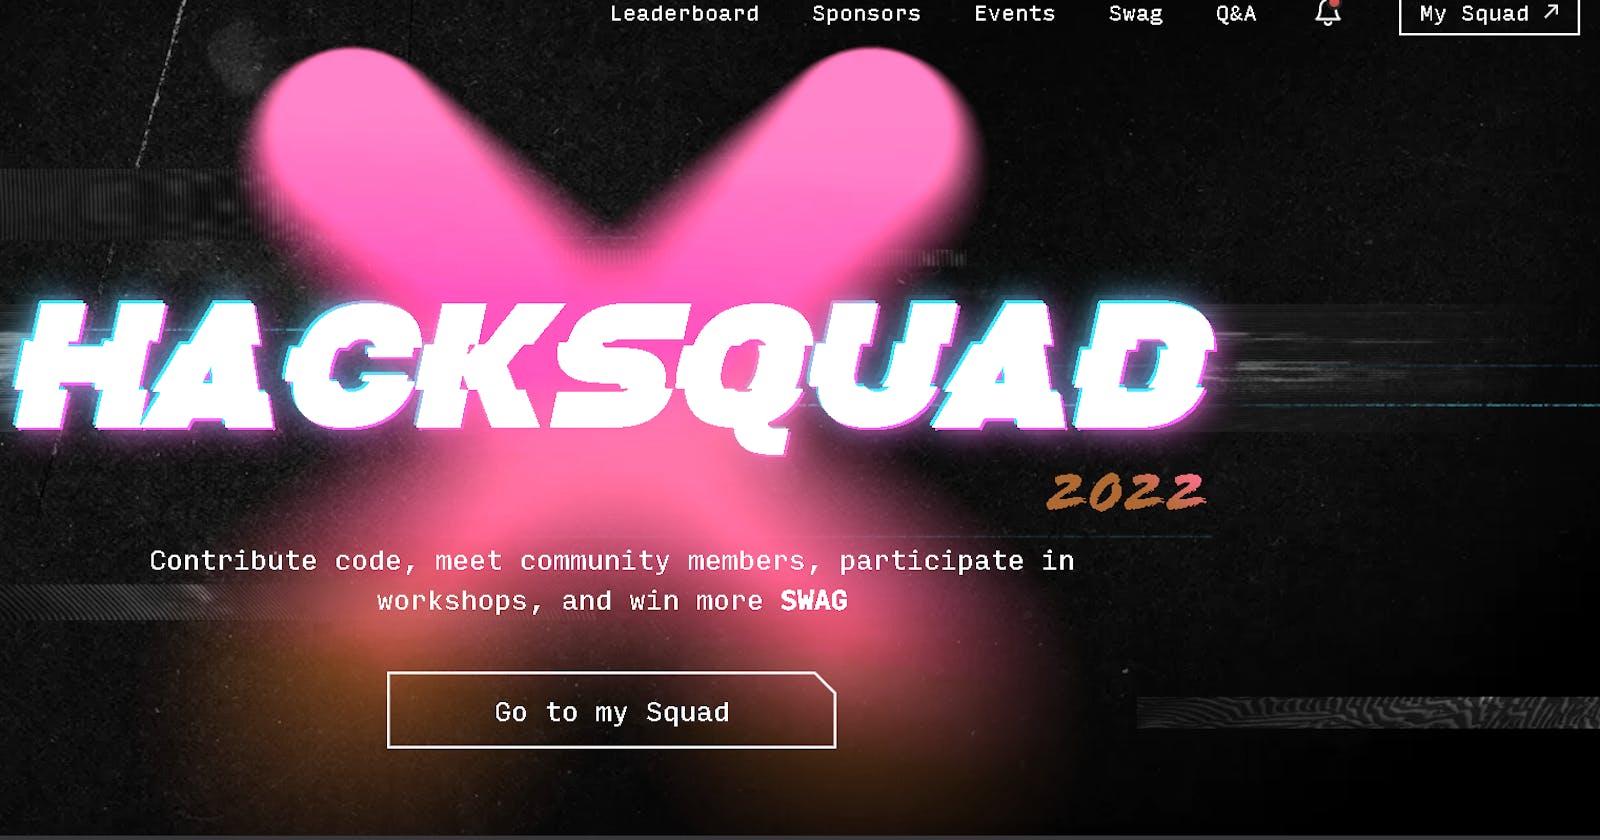 Our Journey to Top 60 in HackSquad '22